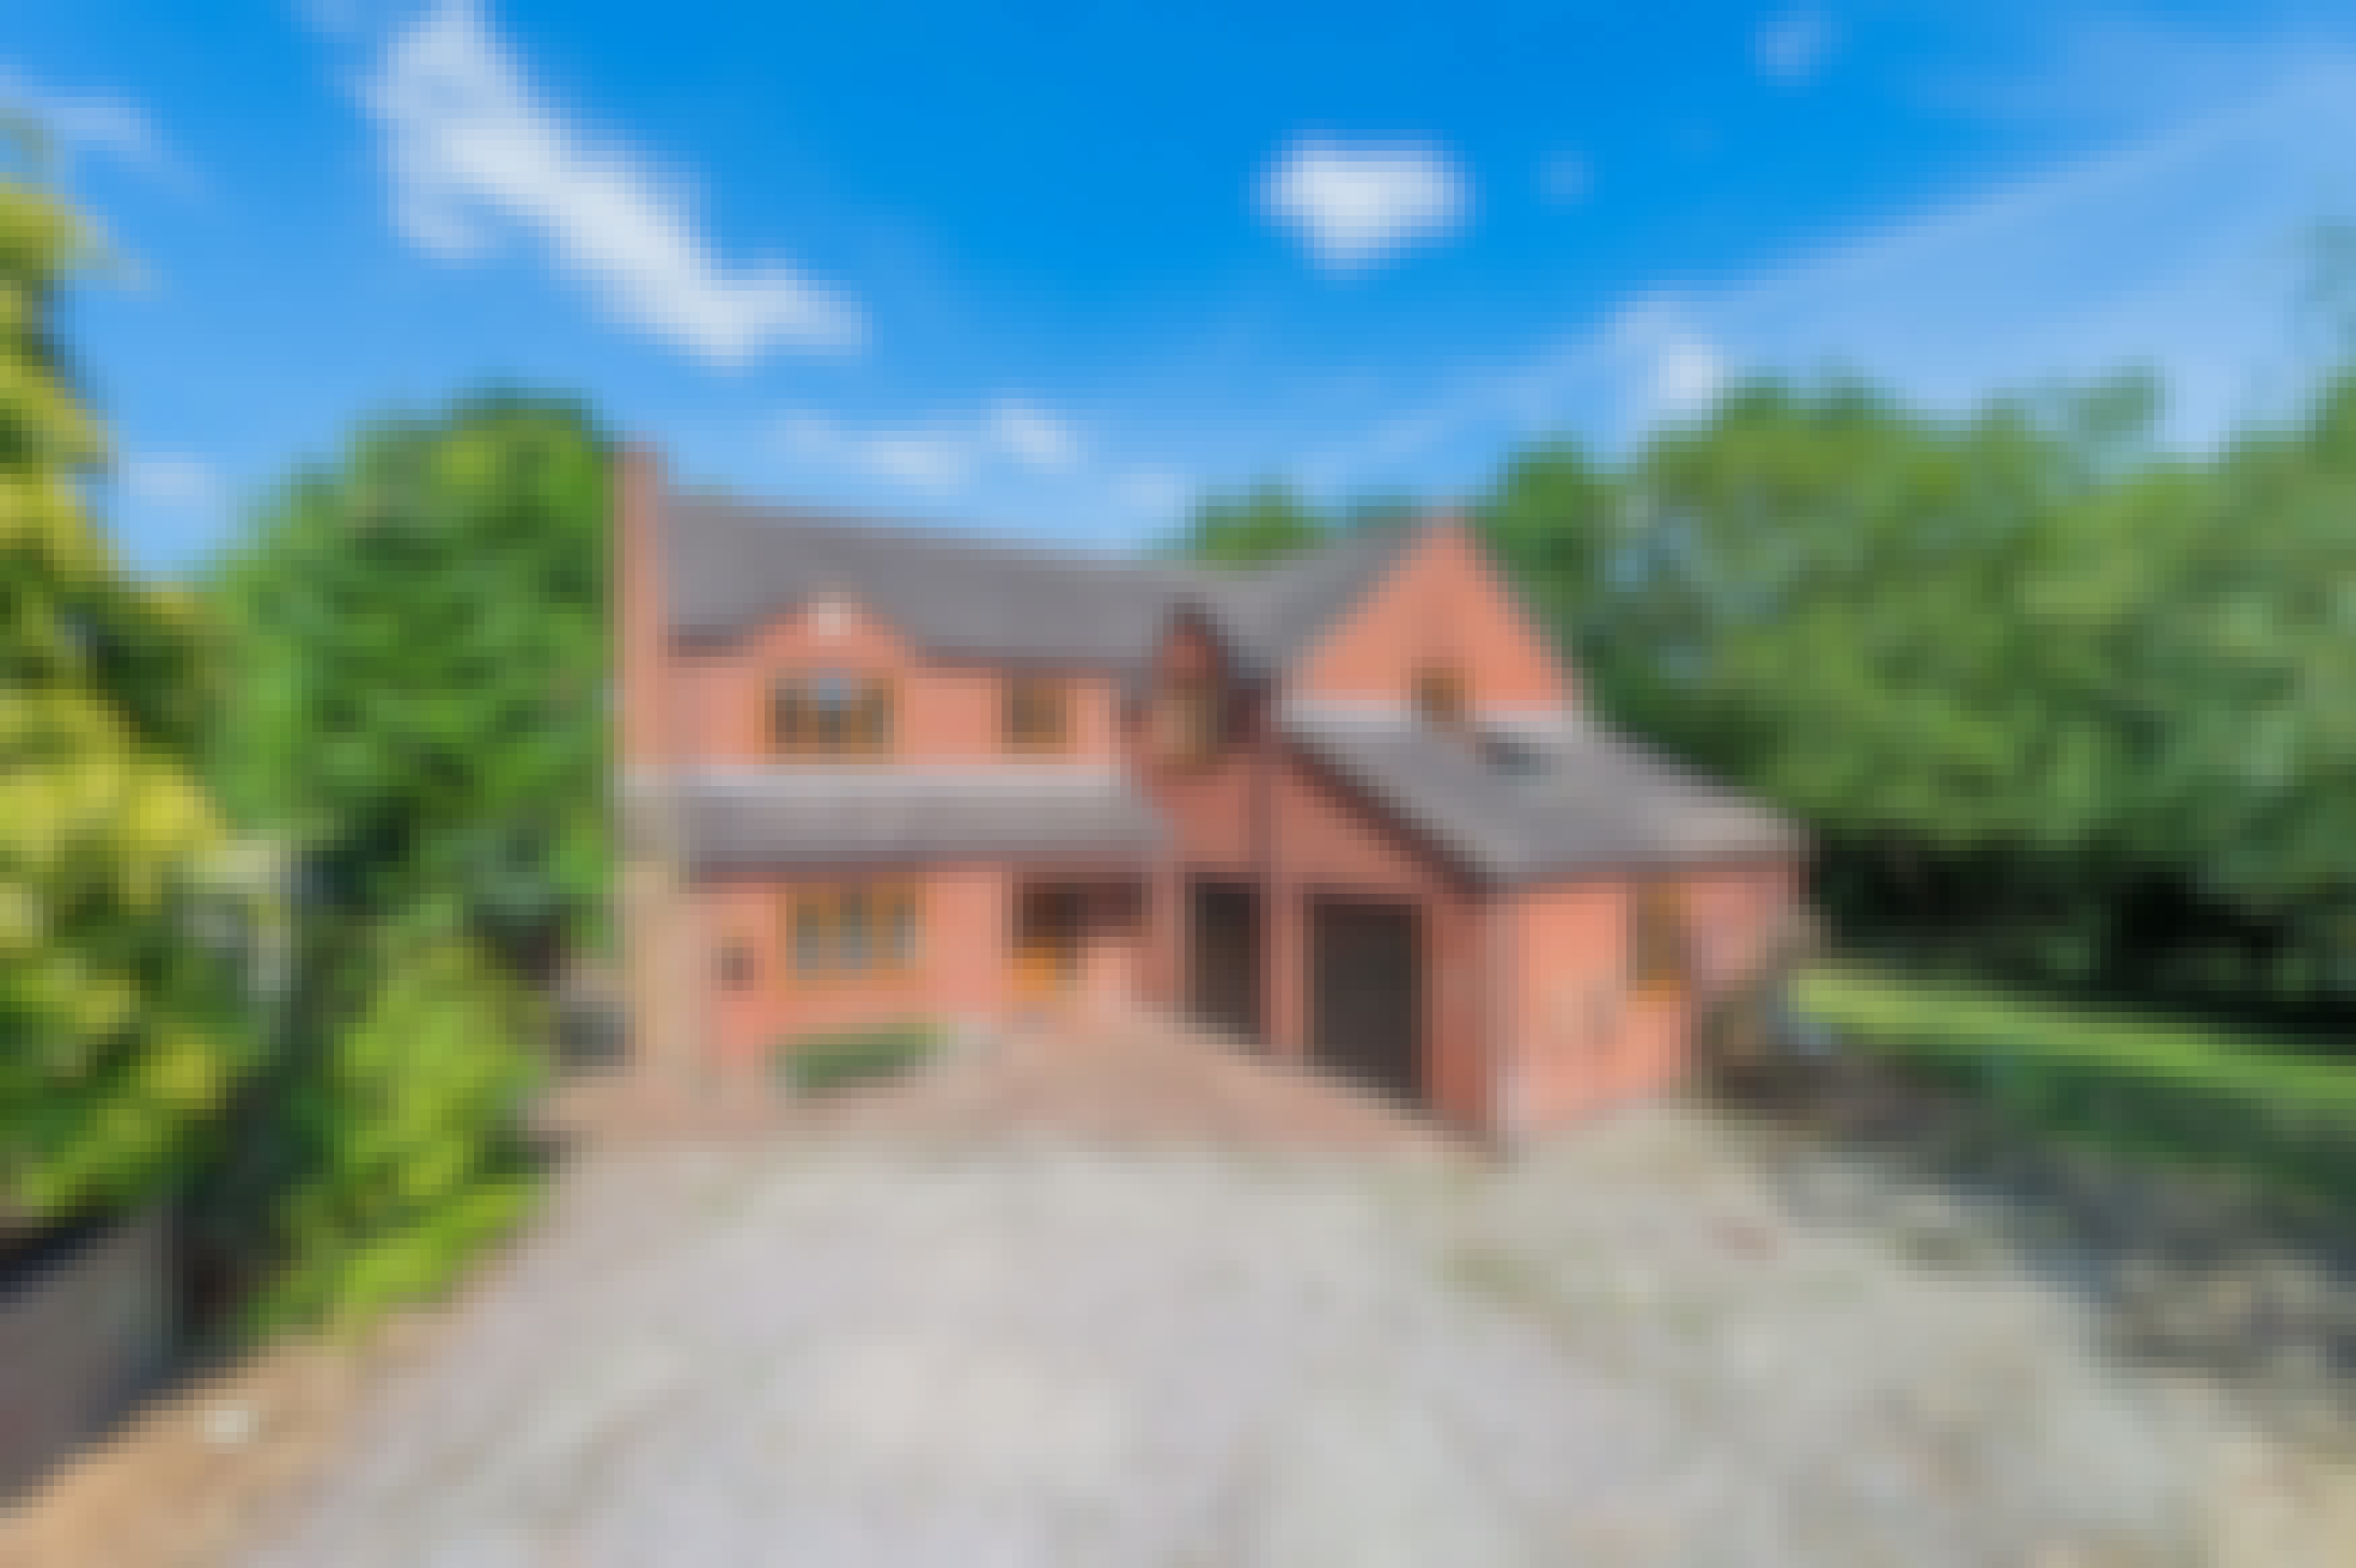 Overview image #1 for Glendinning Way, Madeley, Telford, TF7